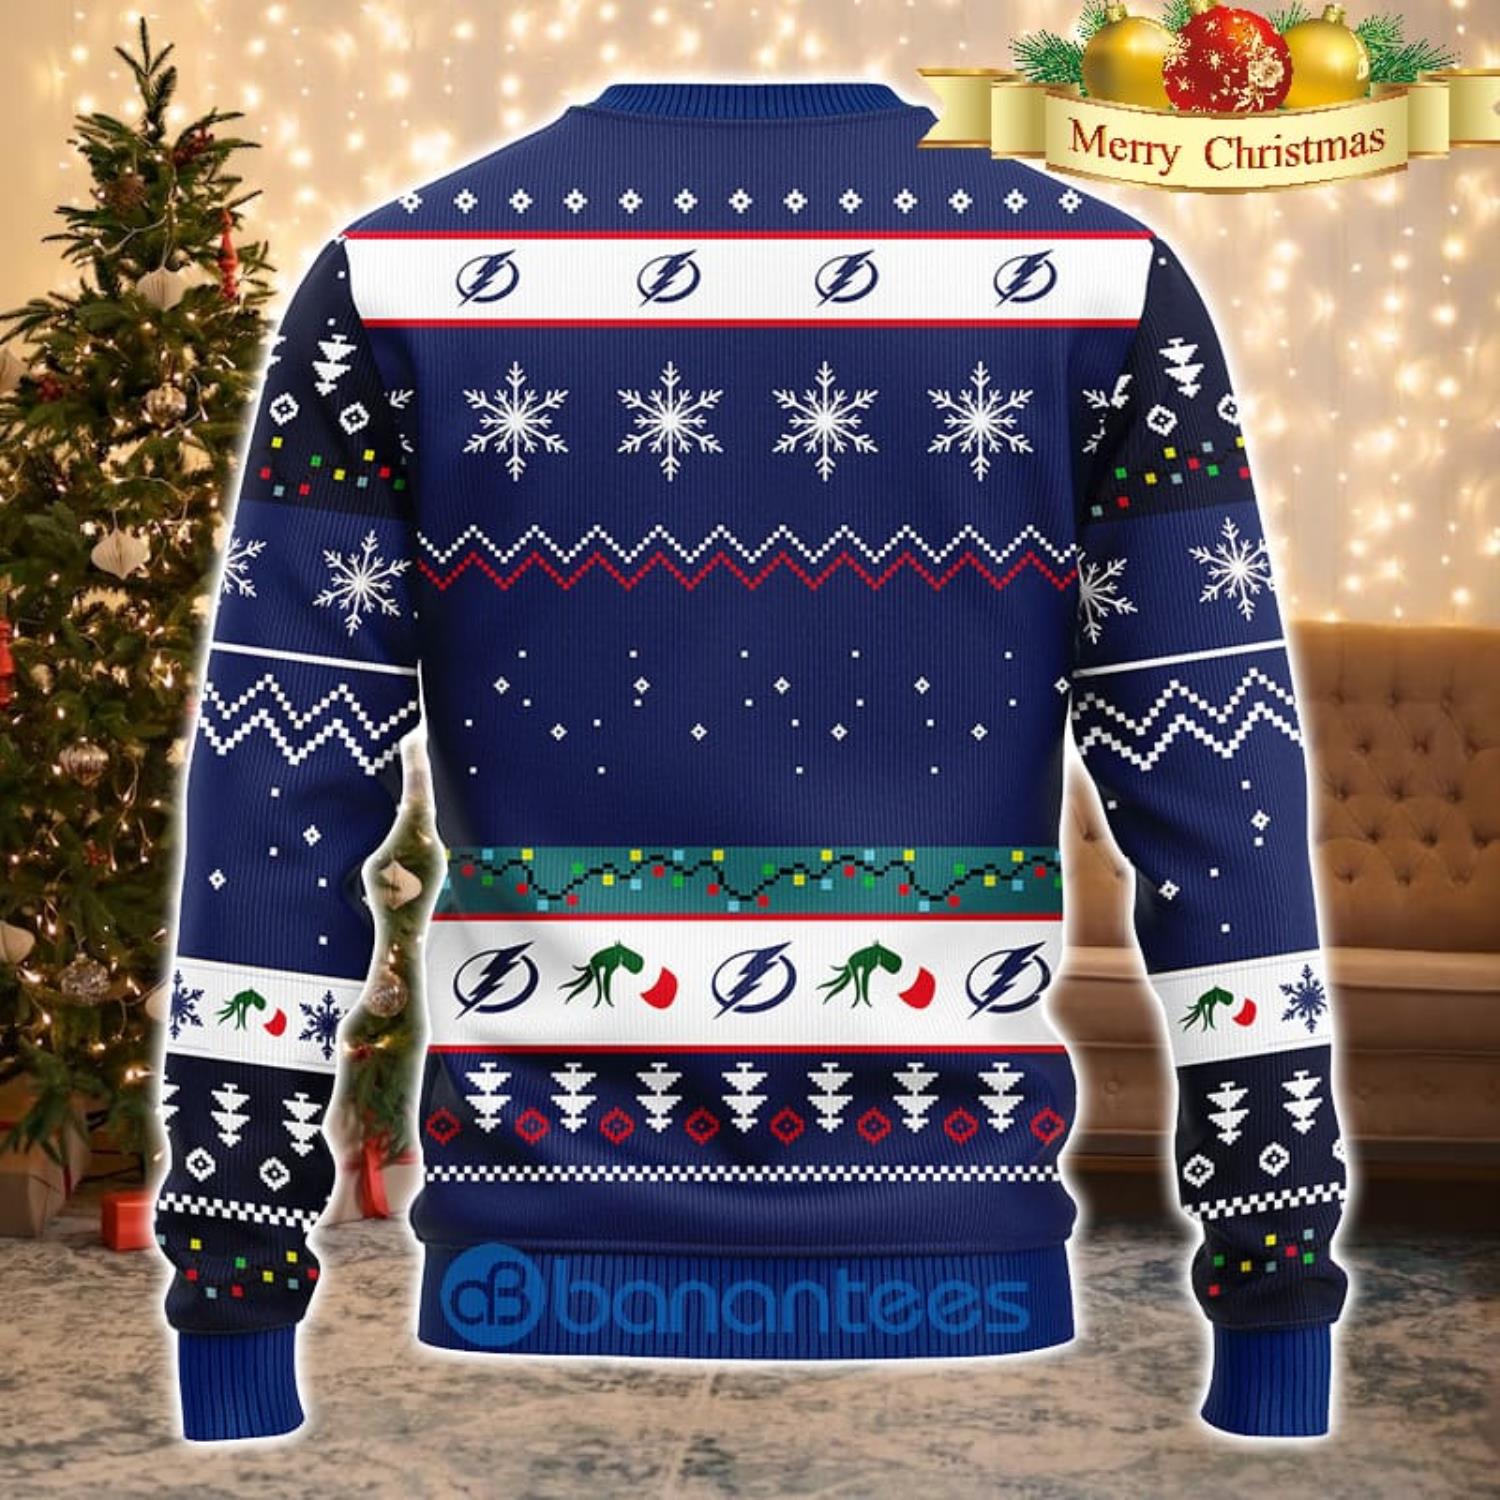 Tampa Bay Lightning Grinch Logo NHL Ideas Ugly Christmas Sweater Gift For  Fans - Banantees